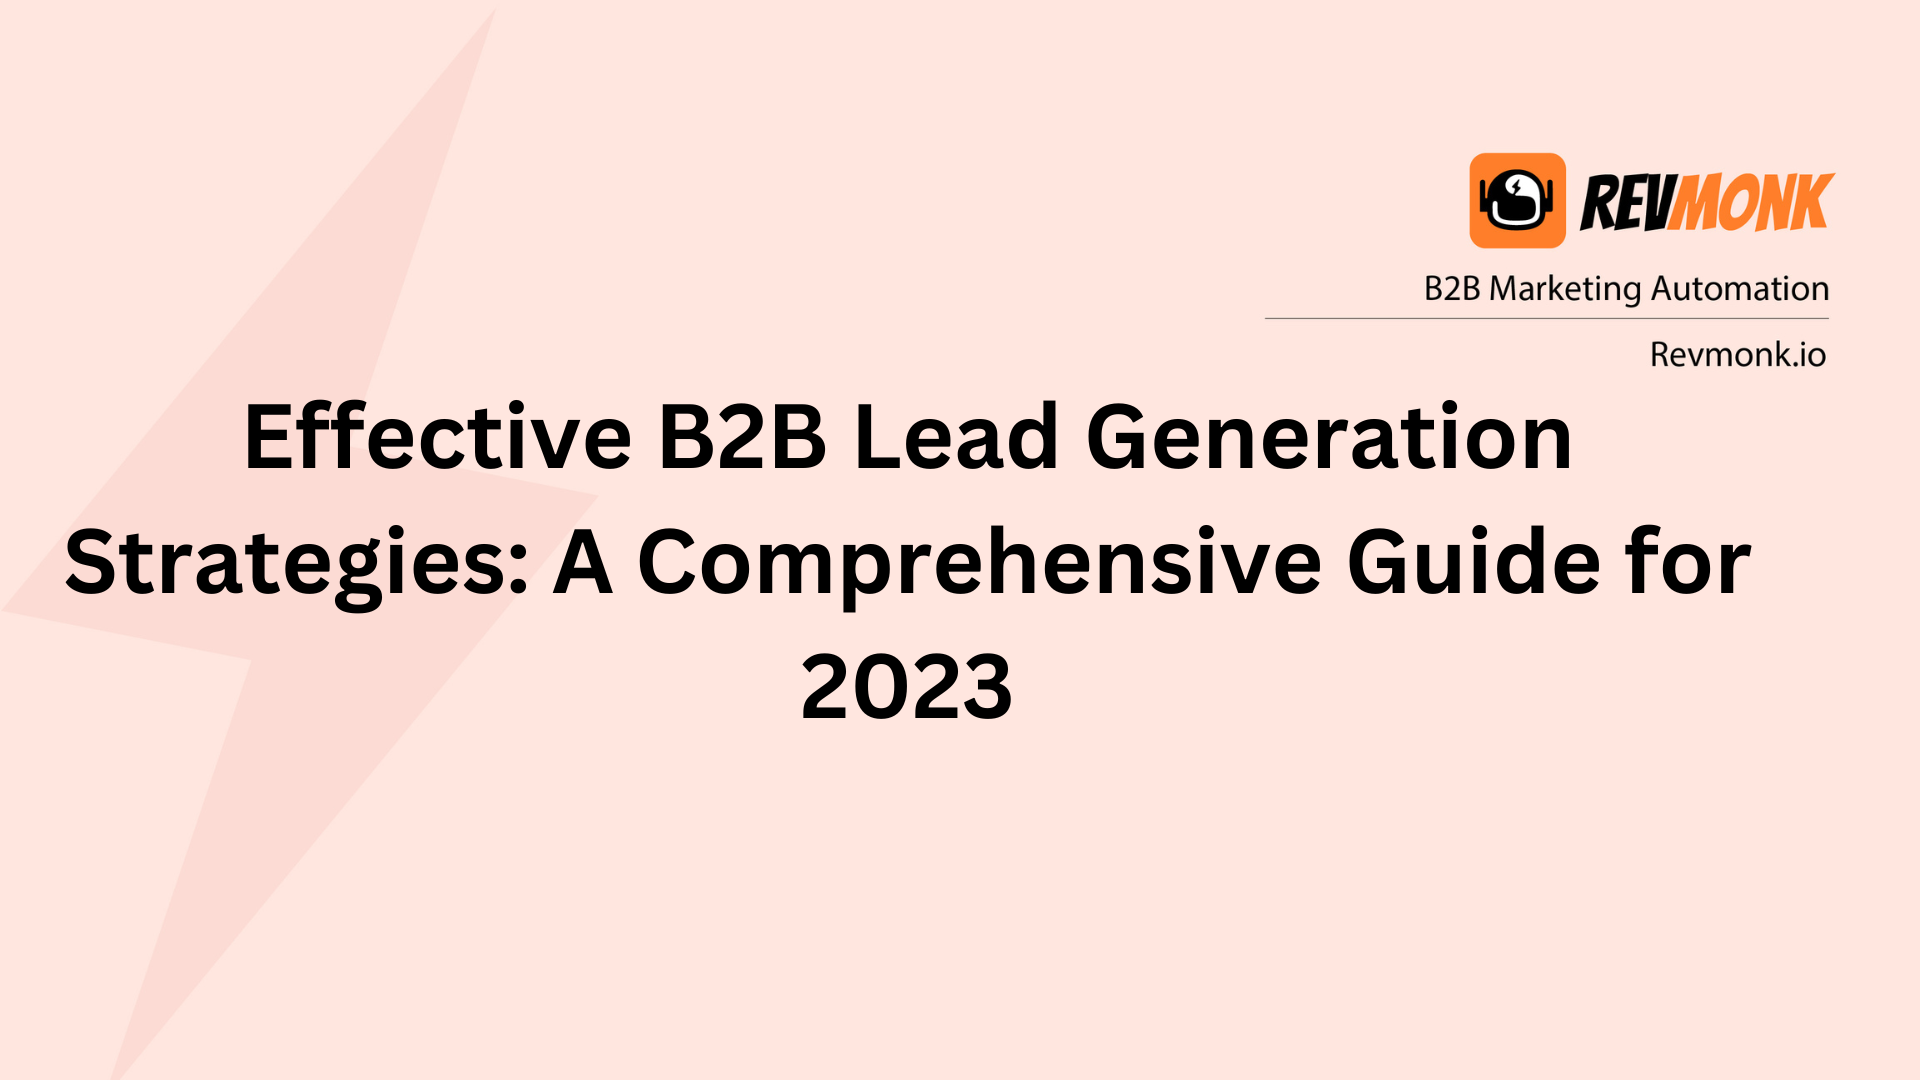 Effective B2B Lead Generation Strategies: A Comprehensive Guide for 2023